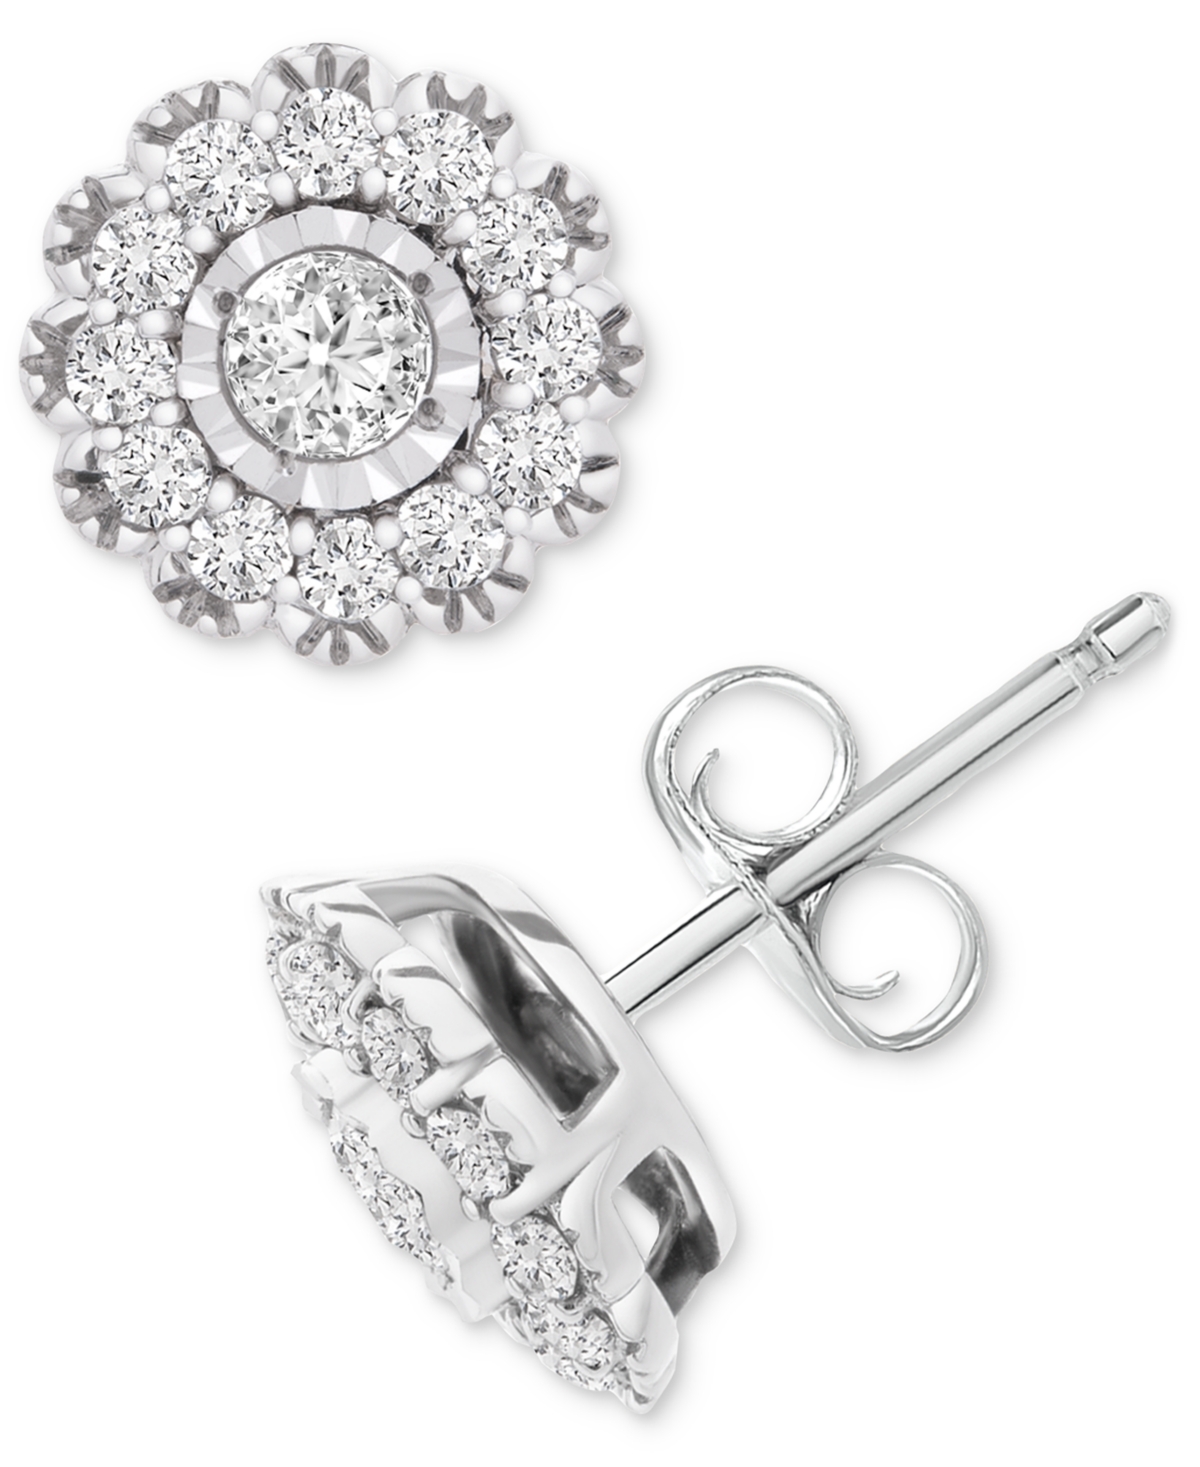 Wrapped In Love Diamond Flower Stud Earrings (1/2 Ct. Tw) In 14k White Gold, Created For Macy's